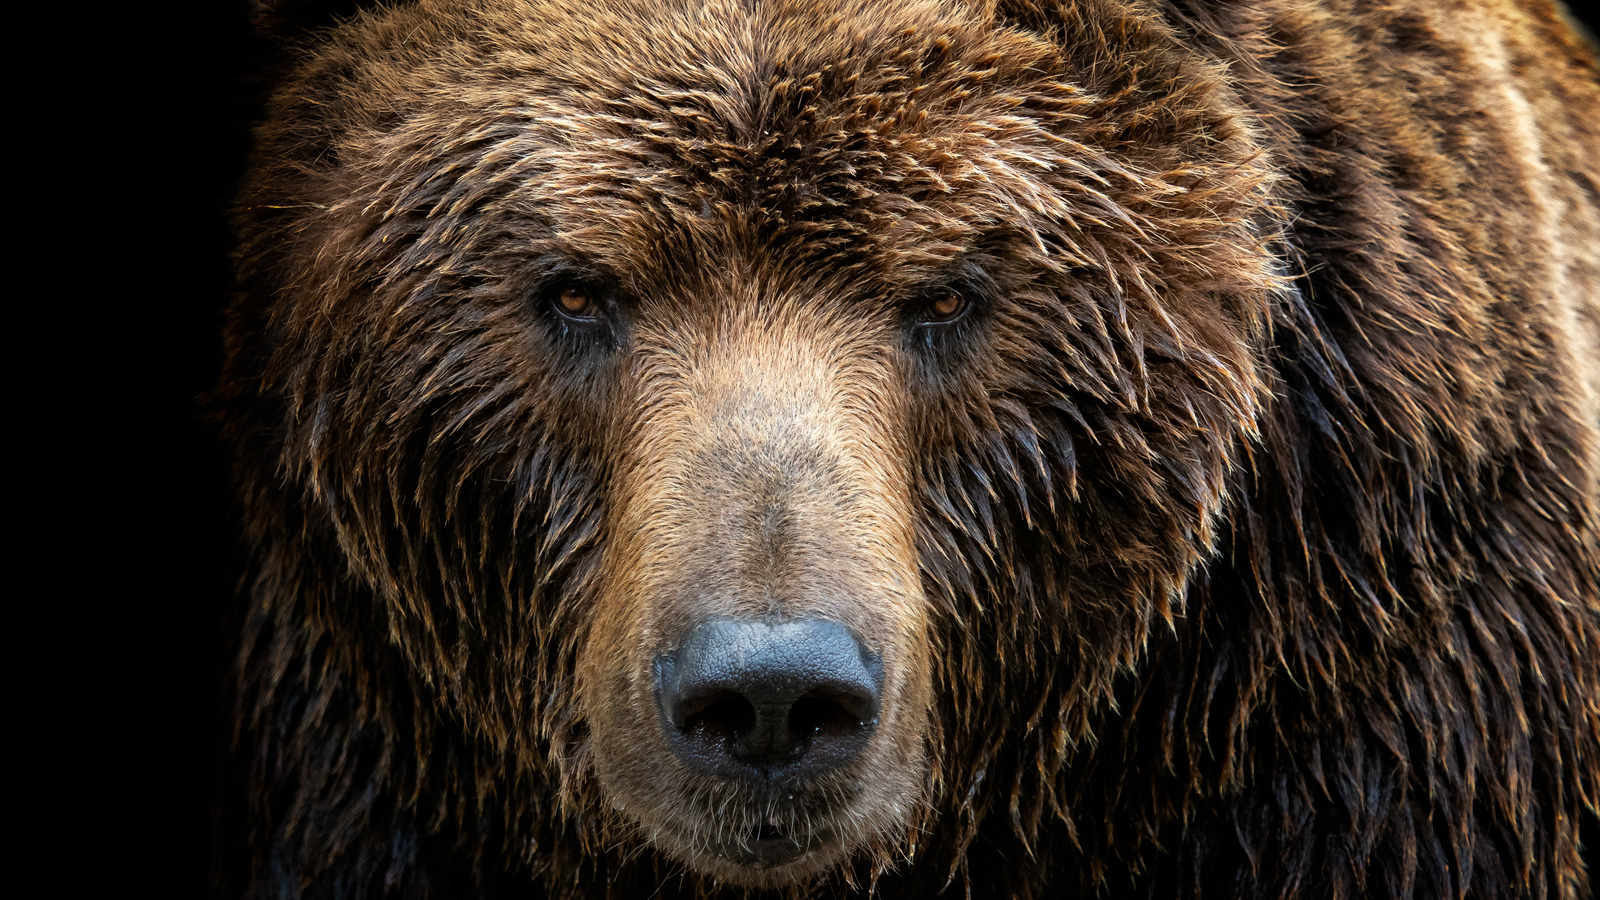 The Wild And Unexpected Way A Man Thwarted A Scary Bear Attack